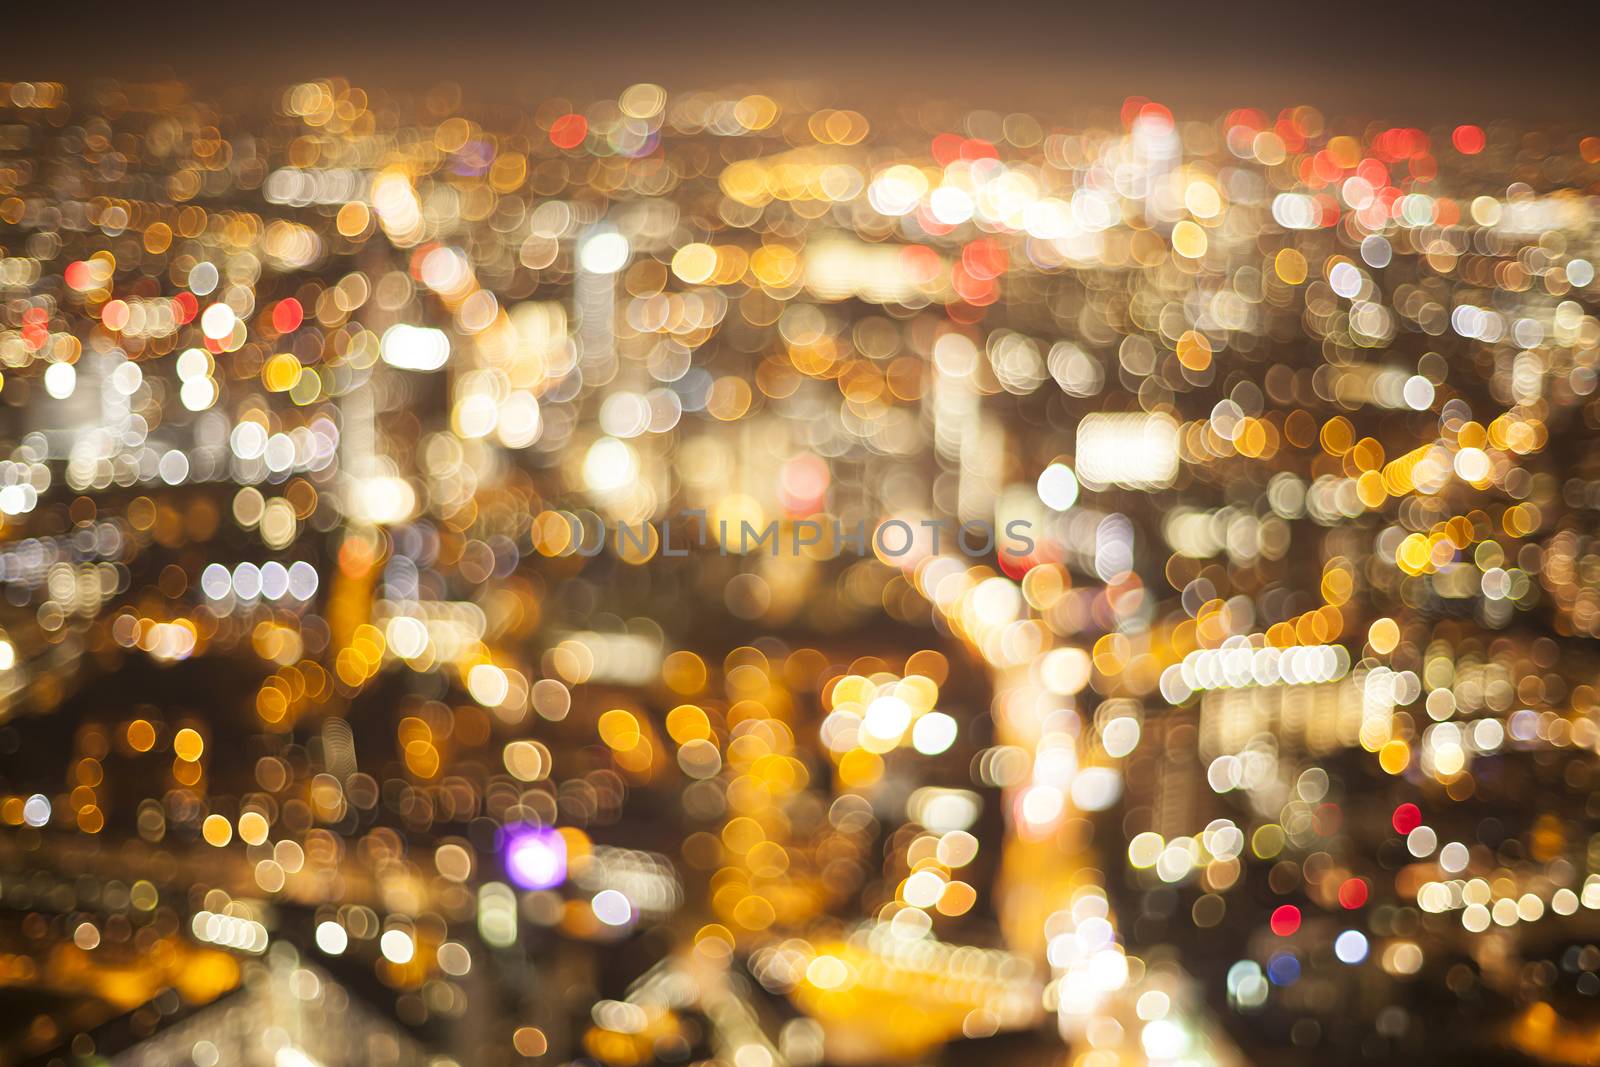 City lights out of focus by conceptualmotion